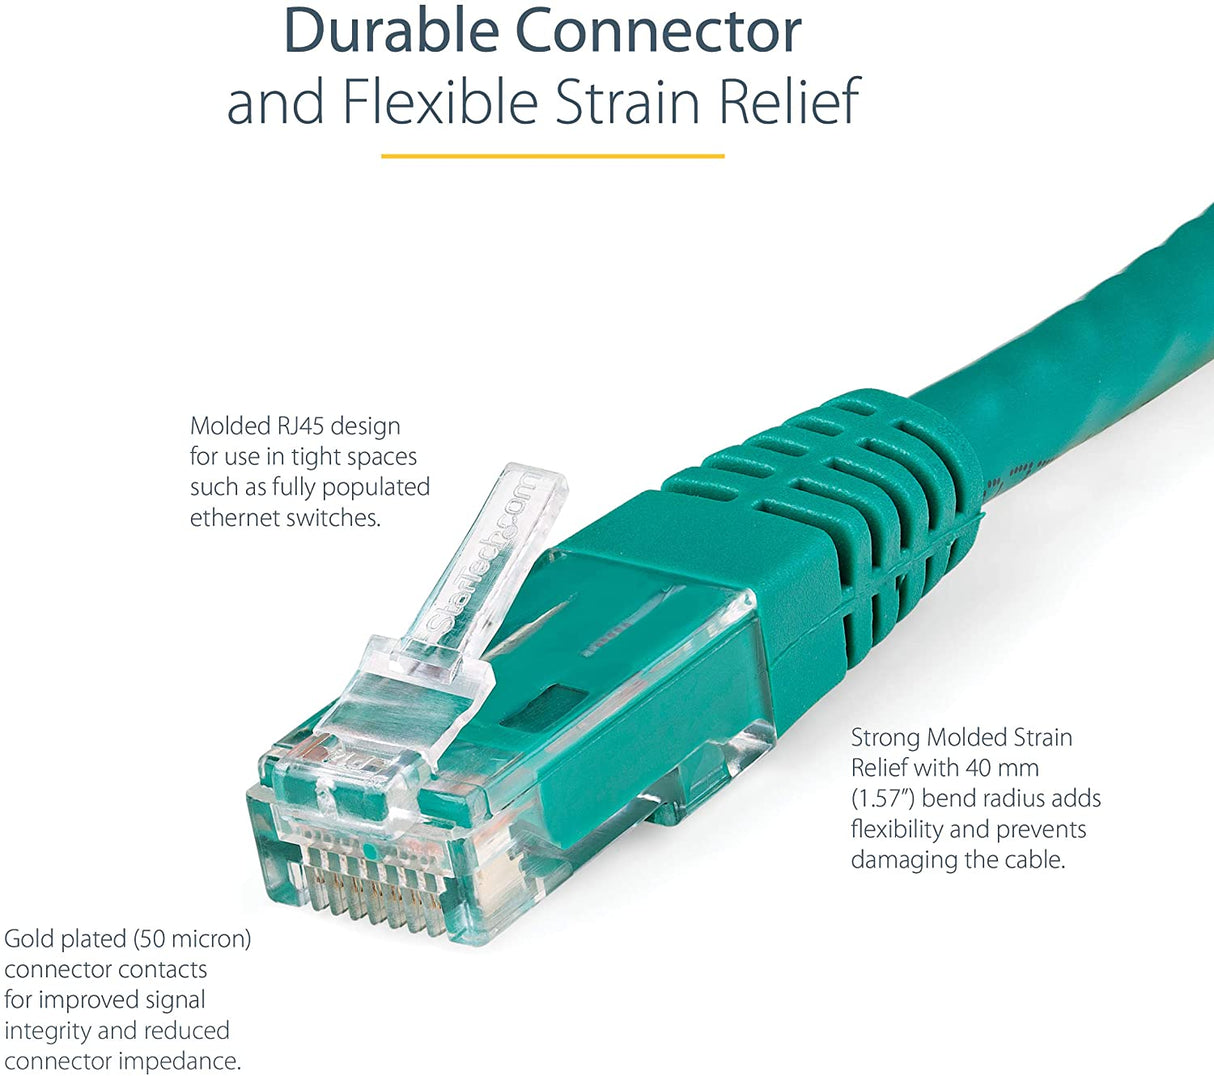 StarTech.com 15ft CAT6 Ethernet Cable - Green CAT 6 Gigabit Ethernet Wire -650MHz 100W PoE++ RJ45 UTP Molded Category 6 Network/Patch Cord w/Strain Relief/Fluke Tested UL/TIA Certified (C6PATCH15GN) Green 15 ft / 4.5 m 1 Pack